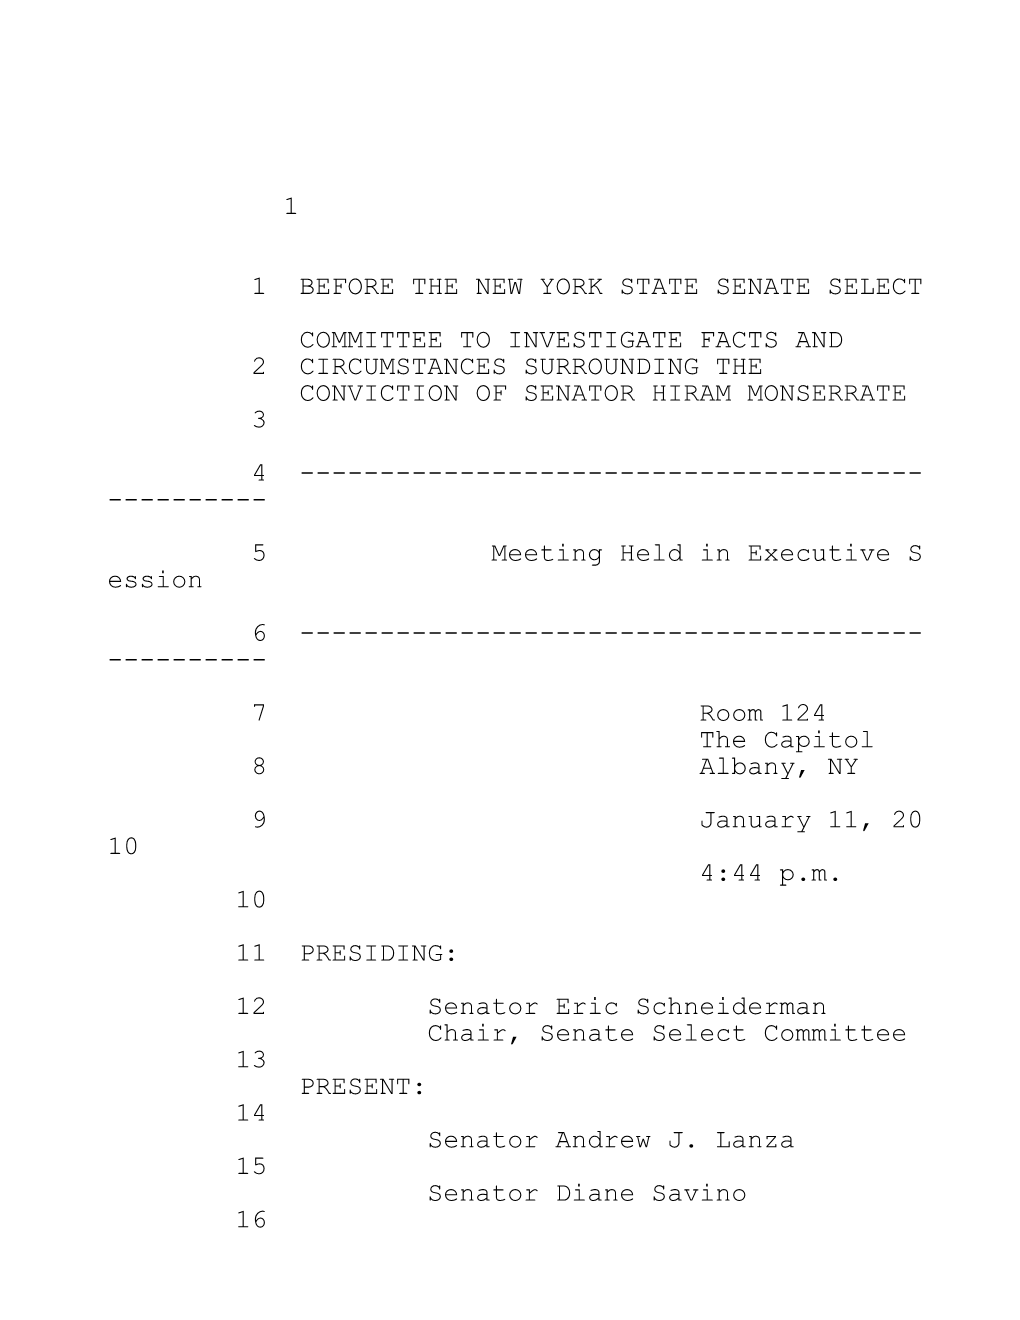 1 1 Before the New York State Senate Select Committee To